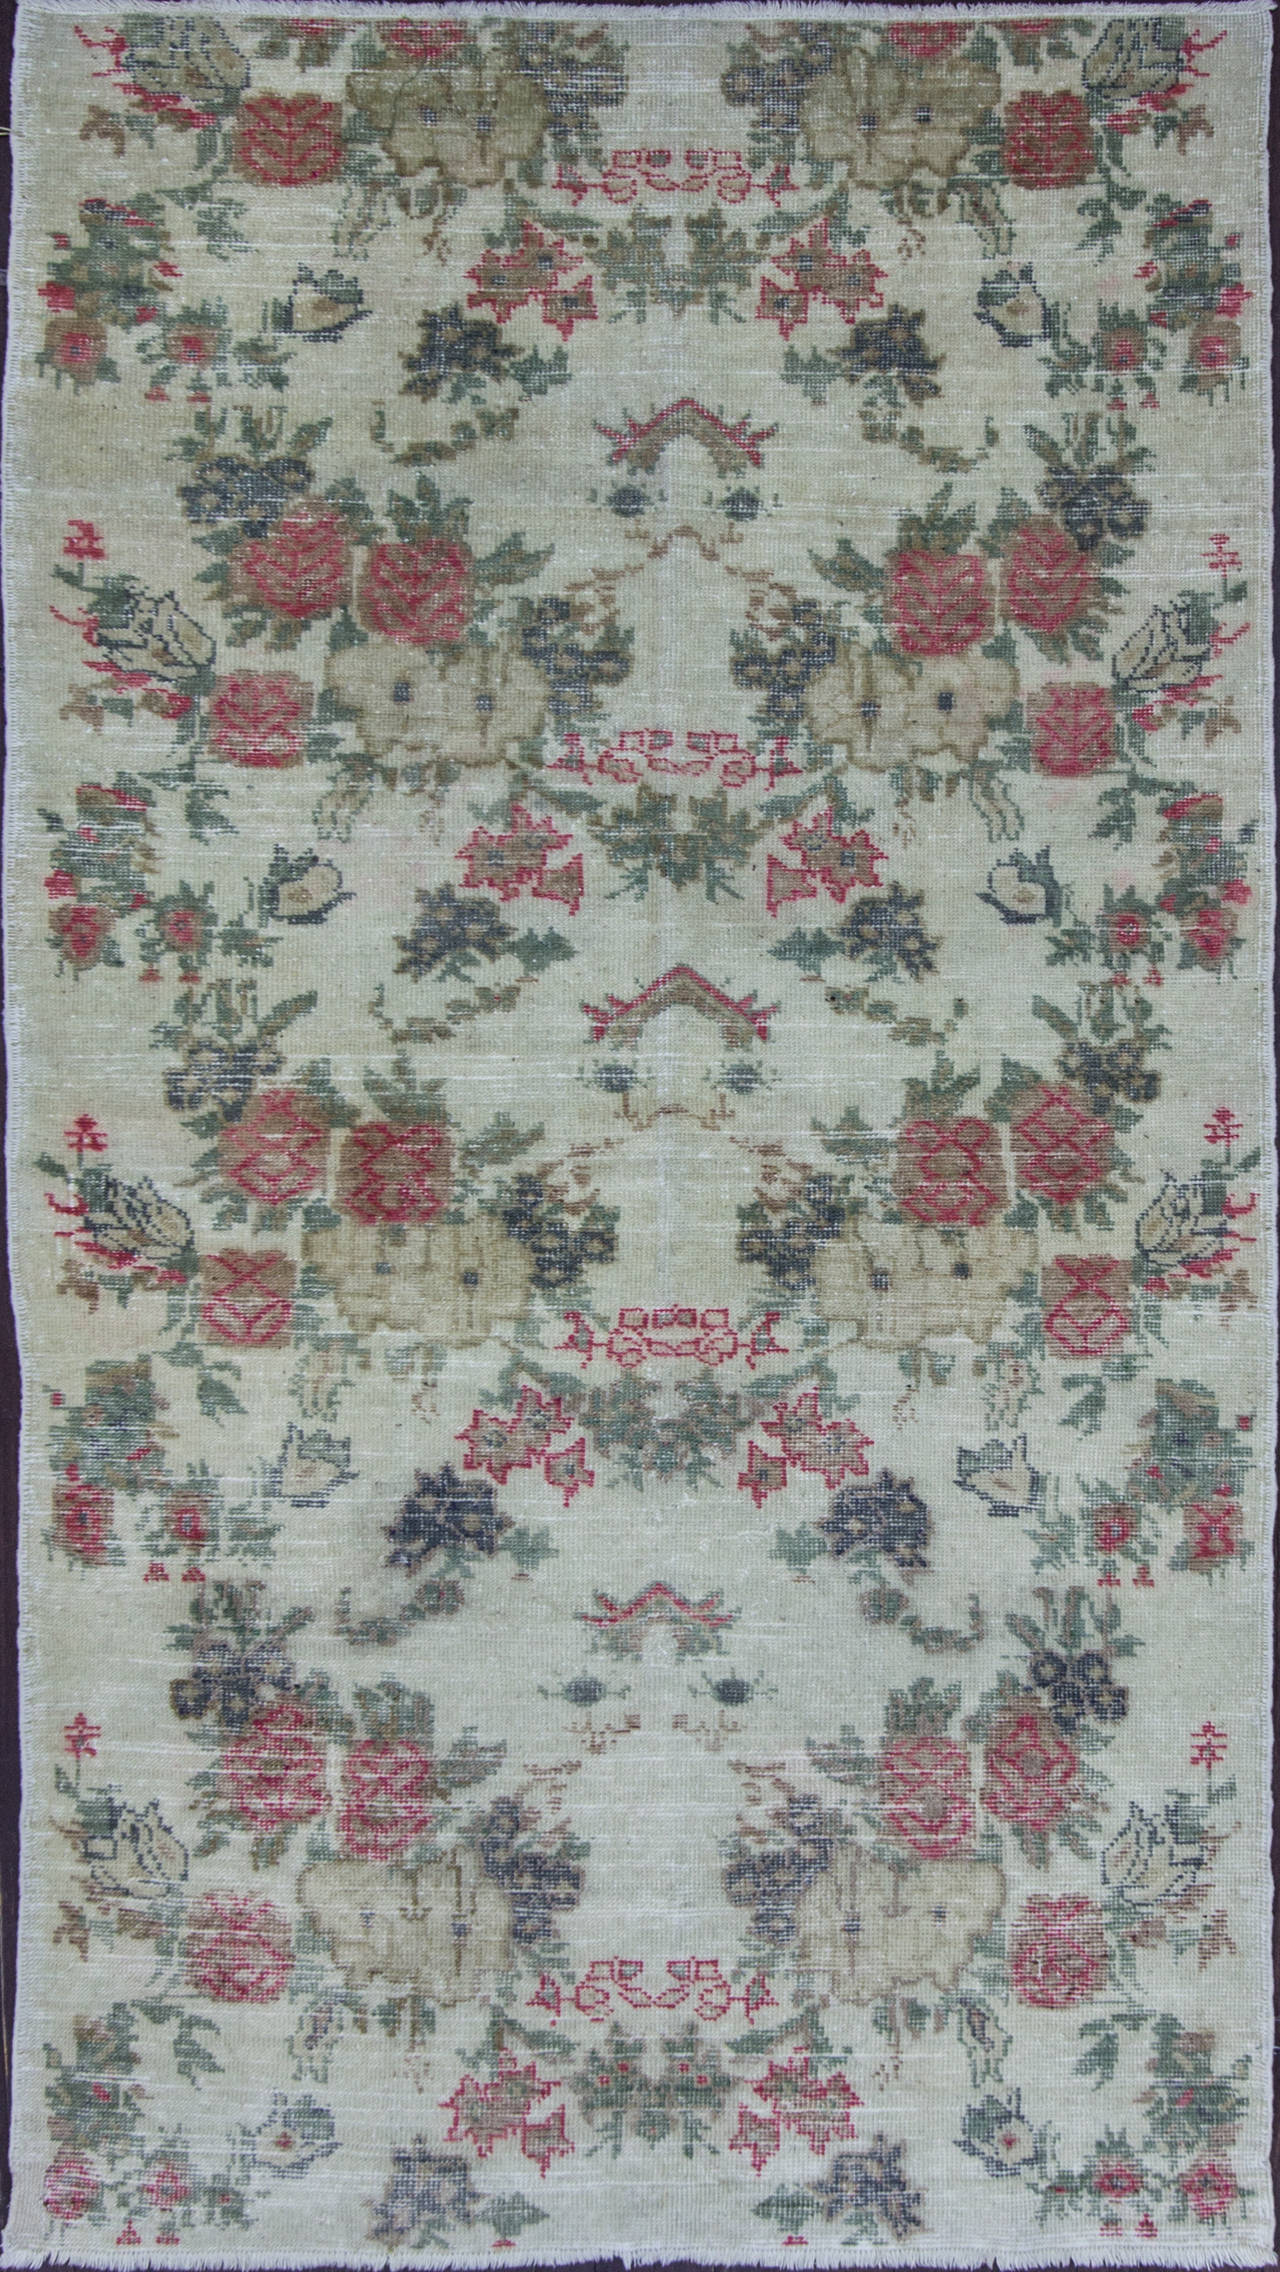 Oushak rugs have been in production since the 15th century with superb wools and natural dyes. Unlike other Turkish rugs, Oushak rugs influenced after Persian rugs and they woven with Ghiordies knots and all double knotted, their design is feature